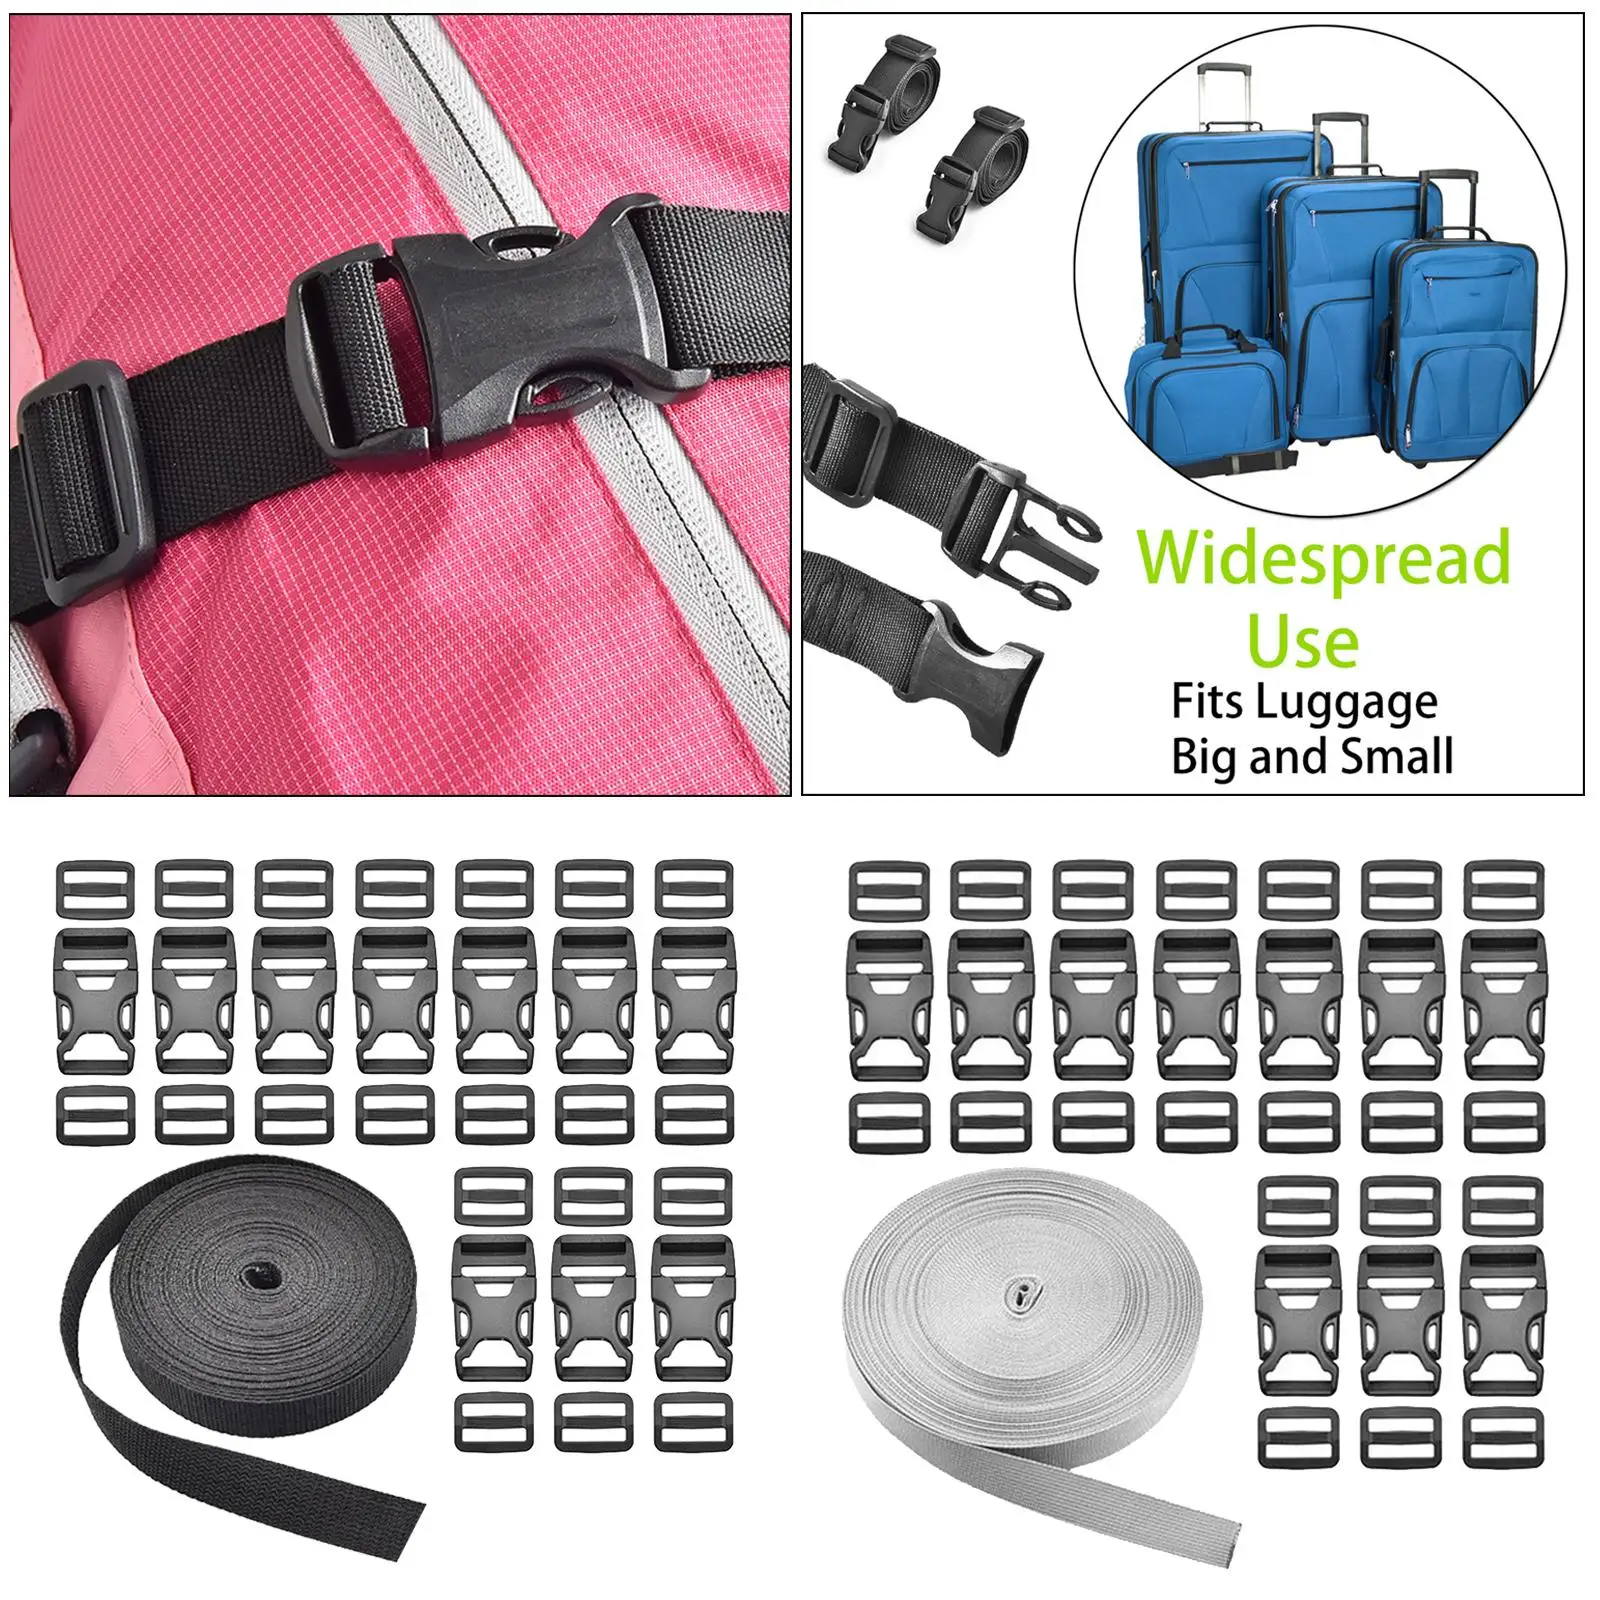 Utility Straps/ Lashing Strap with Buckle Great for Backpacking, air mattresses, Sleeping Bags, Camping Accessories